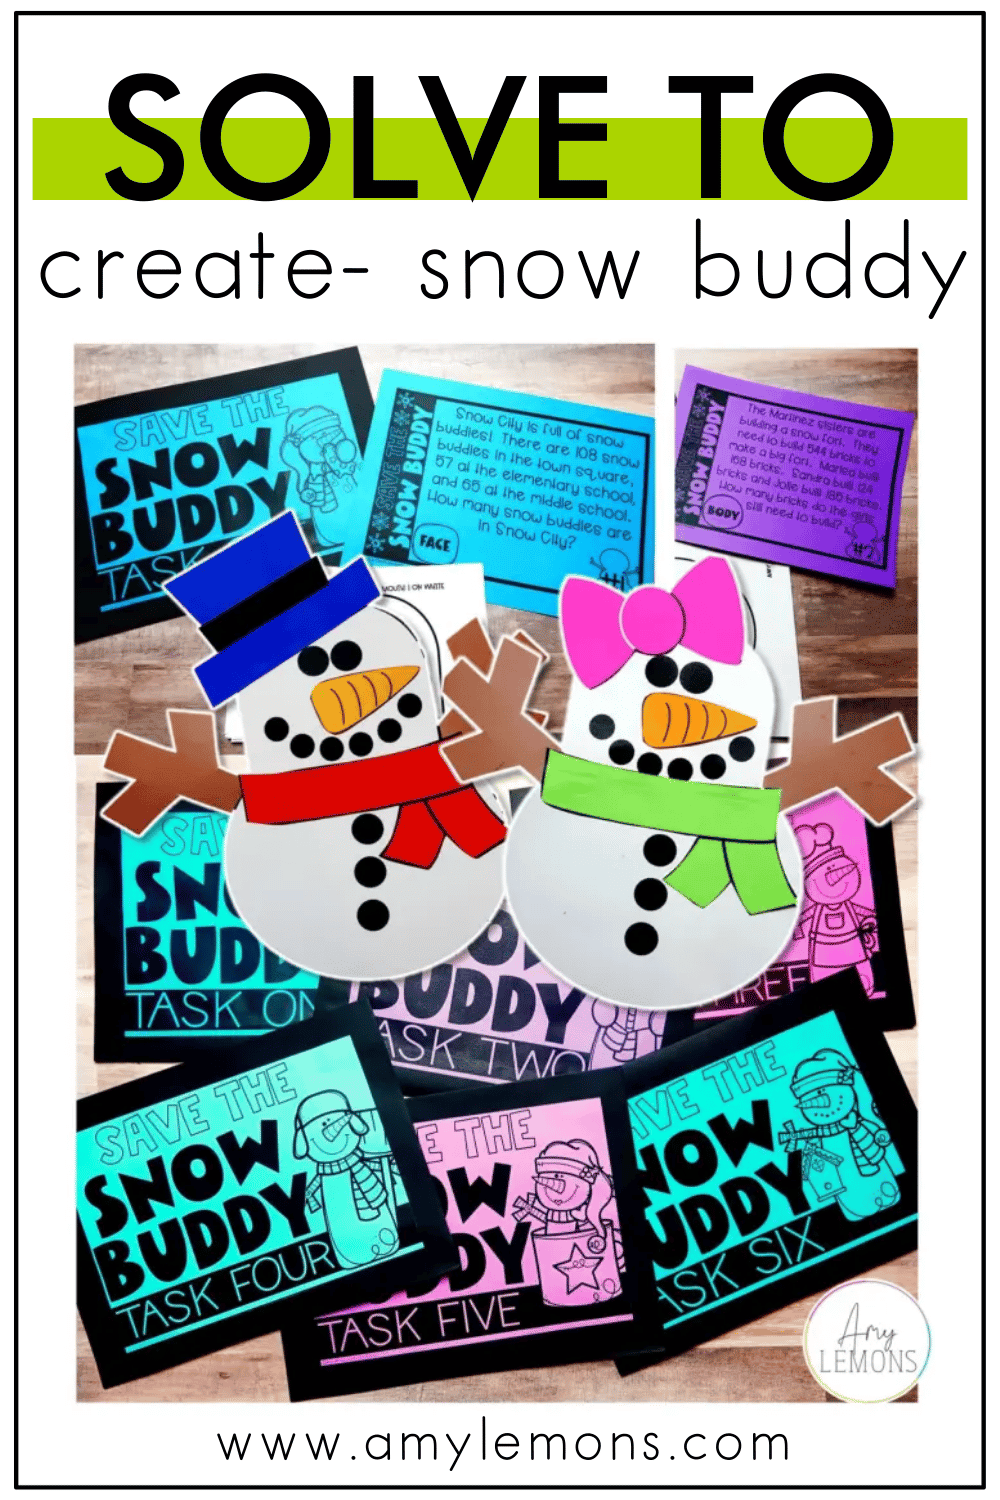 Do You Want to Build a Snowman?: Your Guide to Creating Exciting